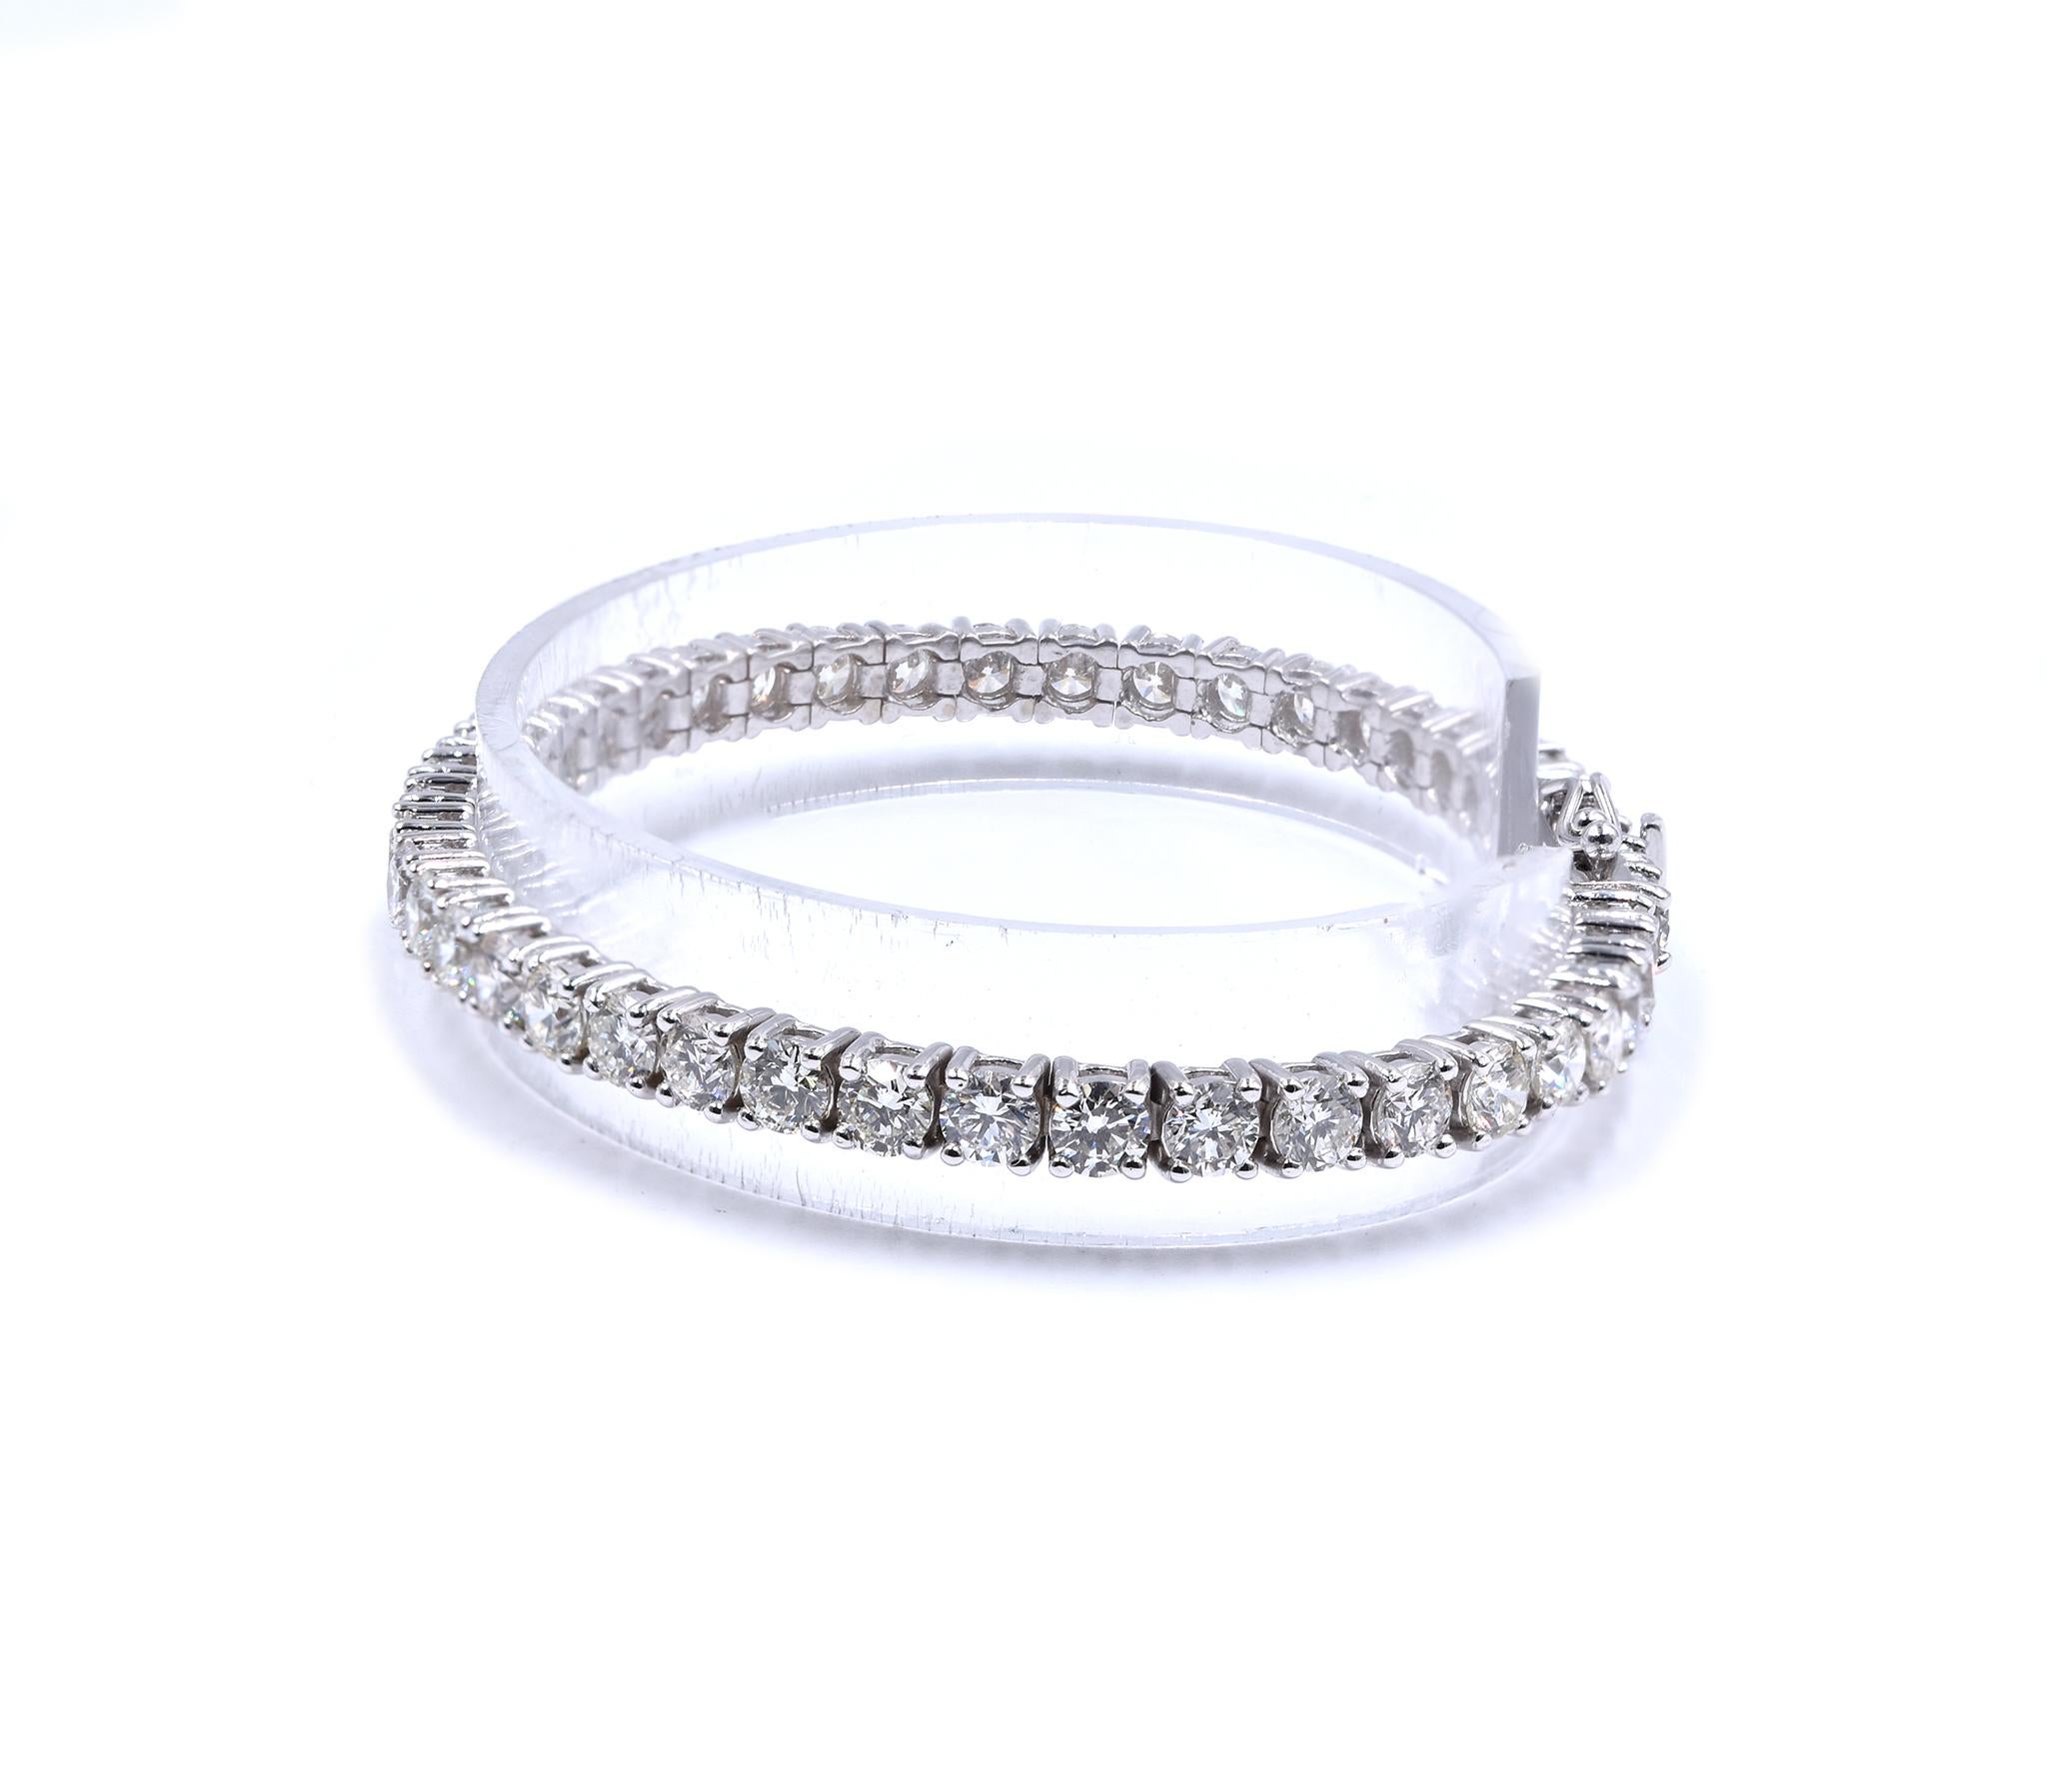 Designer: custom
Material: 14K white gold
Diamonds: 44 round brilliant cut = 10.79cttw
Color: I
Clarity: SI1
Dimensions: bracelet will fit up to a 7-inch wrist
Weight: 15.92 grams
